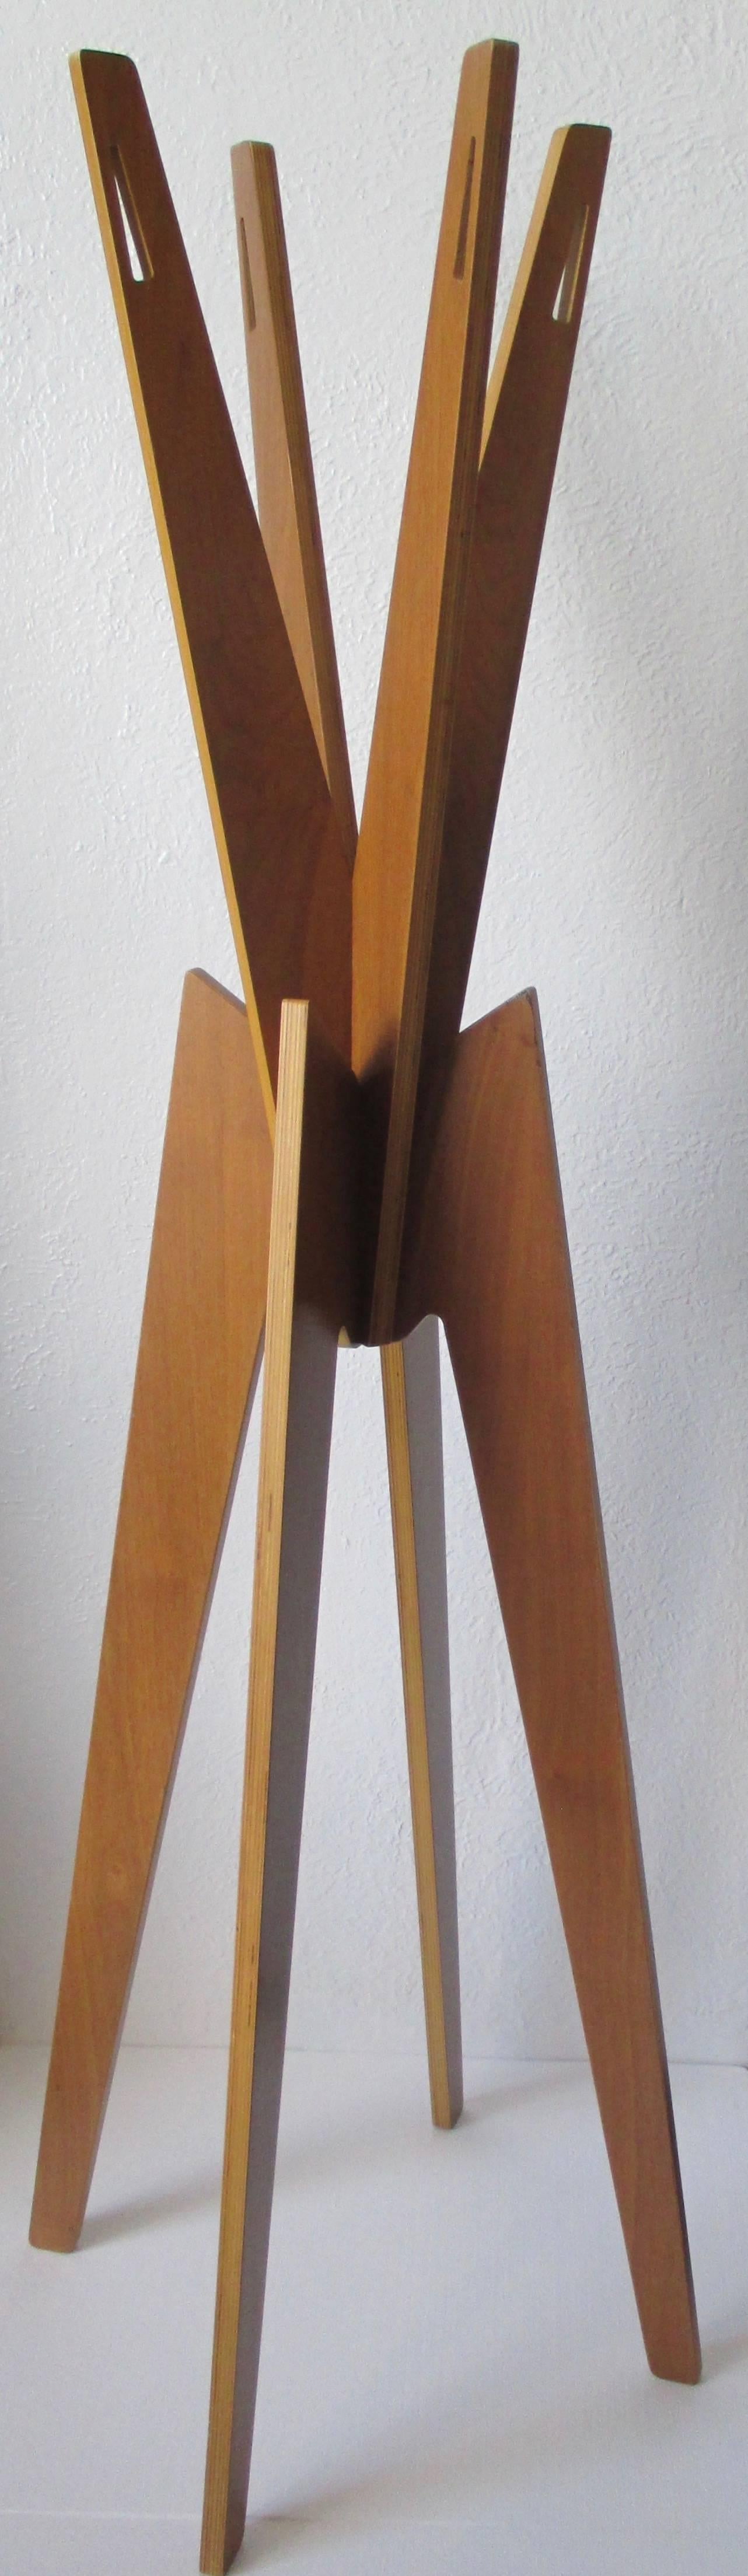 Nyota coatstand by Shin Azumi walnut veneered designed by
Shin Azumi in 2000. Construted only by four pieces of wood-slotted together.